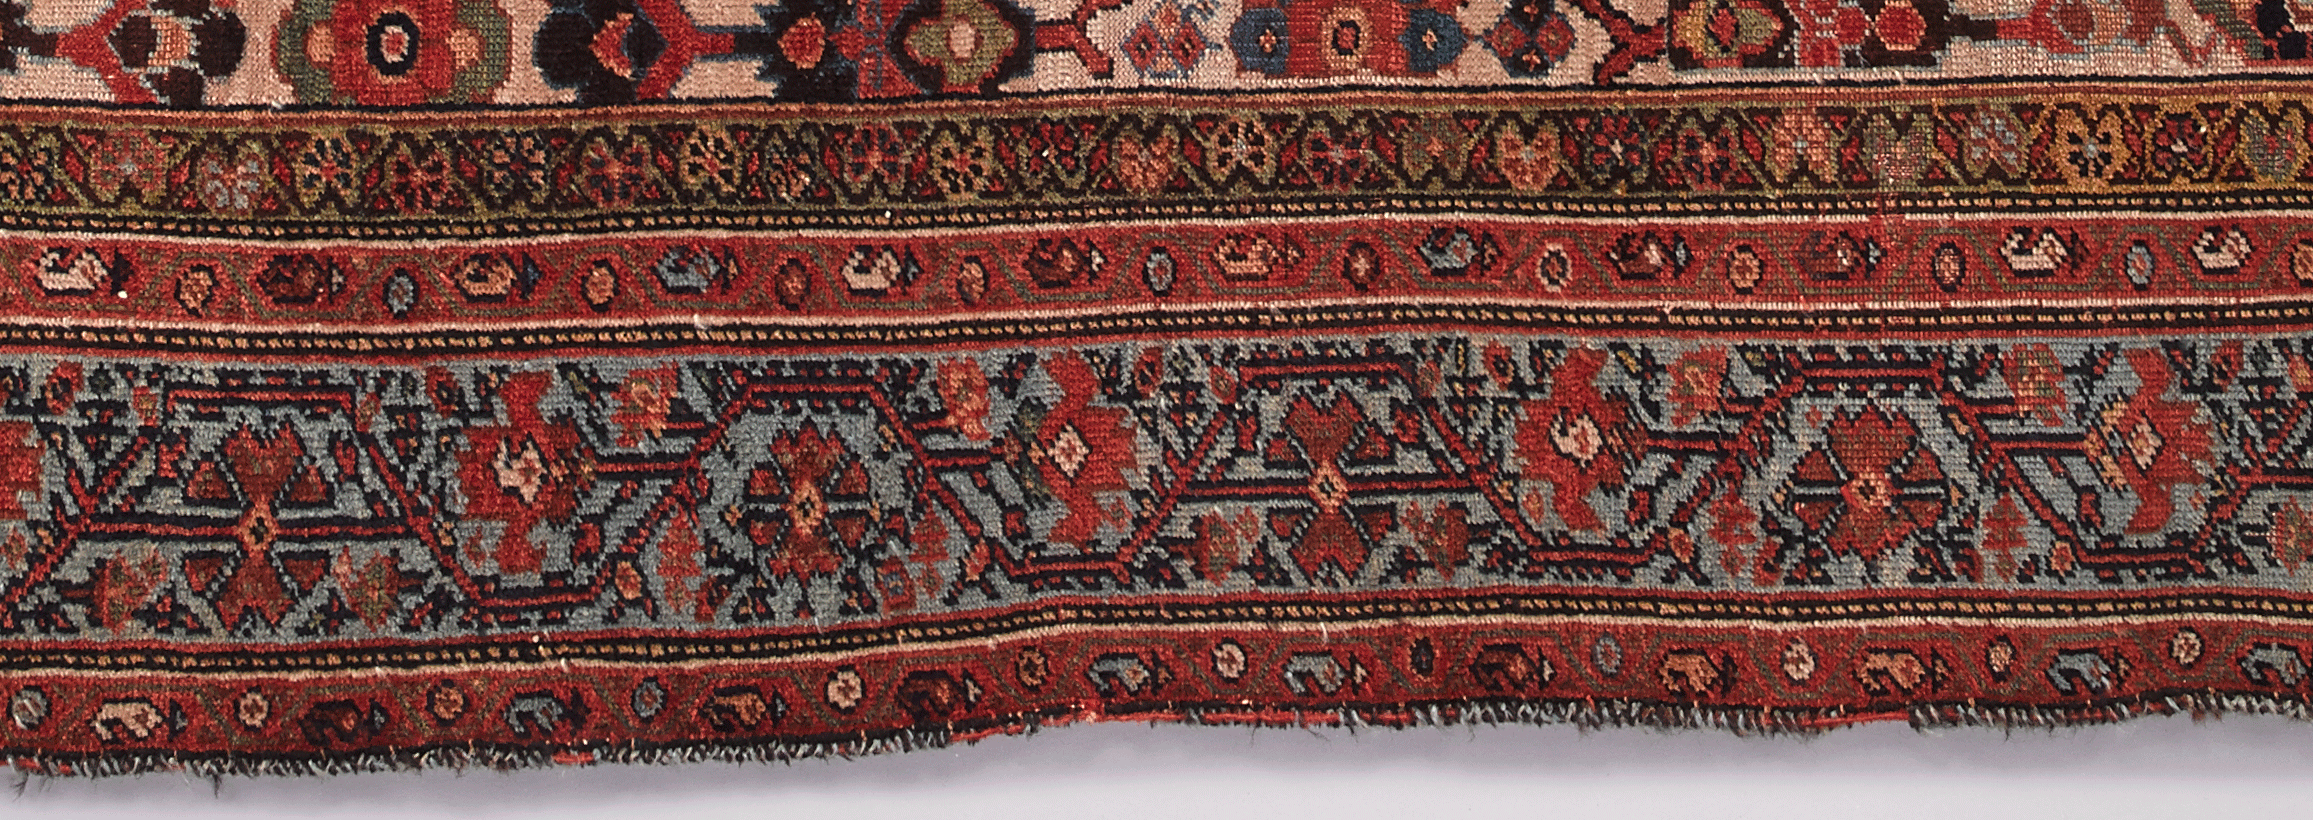 Above: A section of the border of the rug.